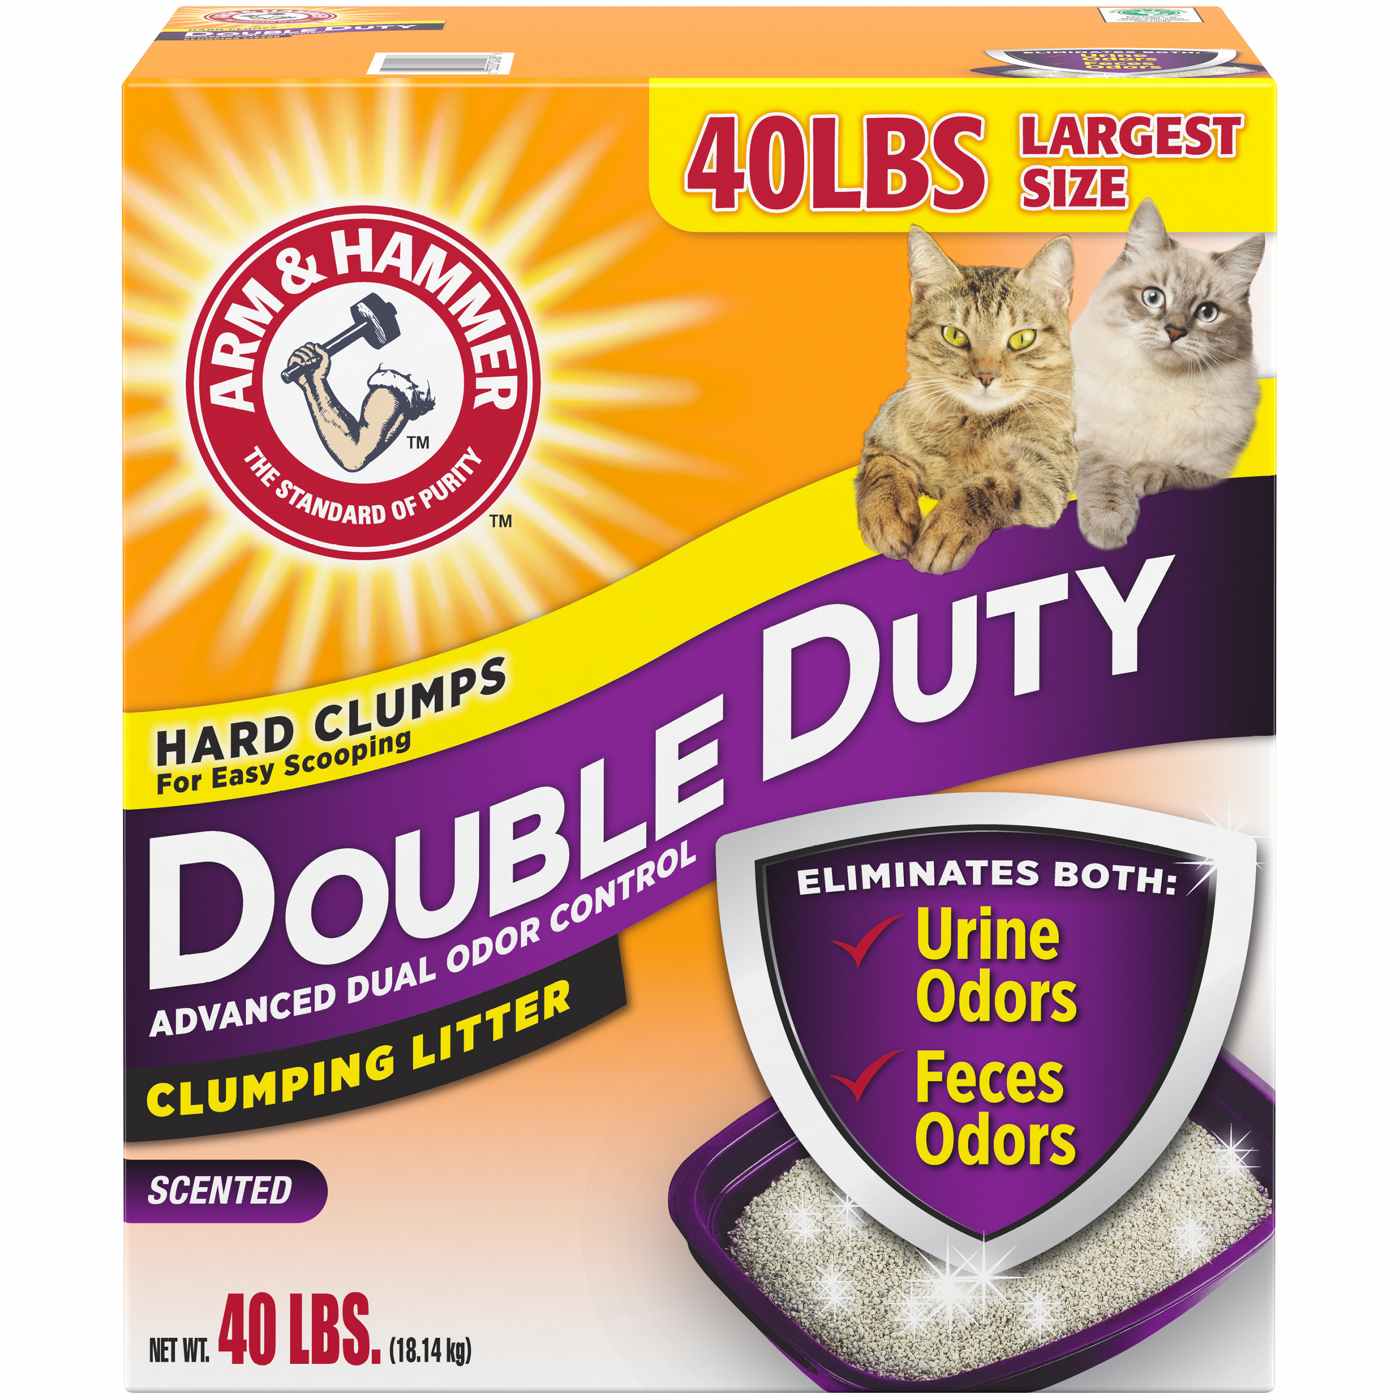 Arm & Hammer Double Duty Advanced Odor Control Clumping Litter; image 1 of 3